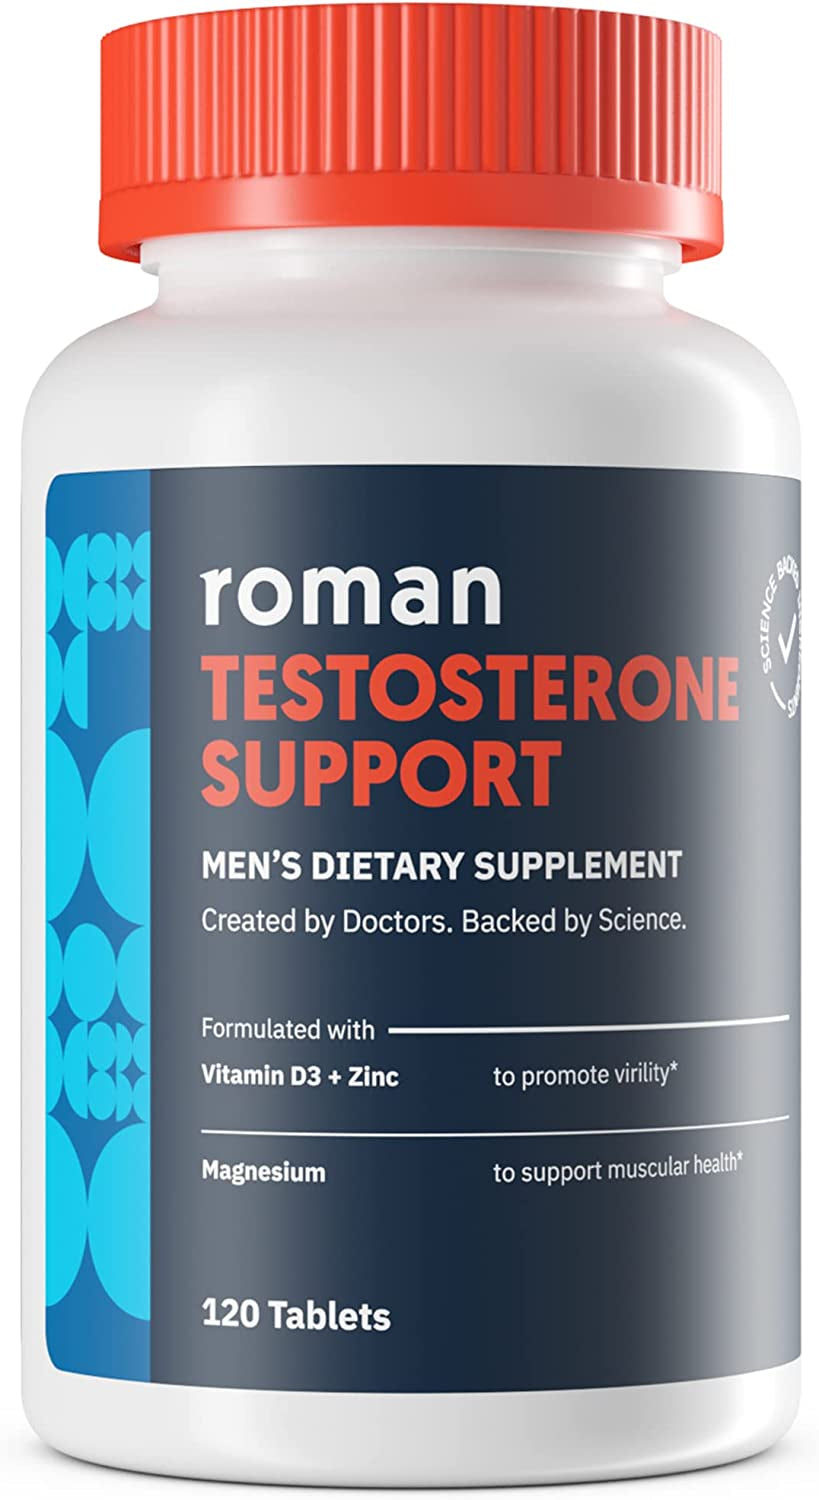 Roman Testosterone Support and Focus Bundle | Men'S Daily Nutritional Supplements to Support T-Levels, Muscle Health, Calm Energy and Concentration